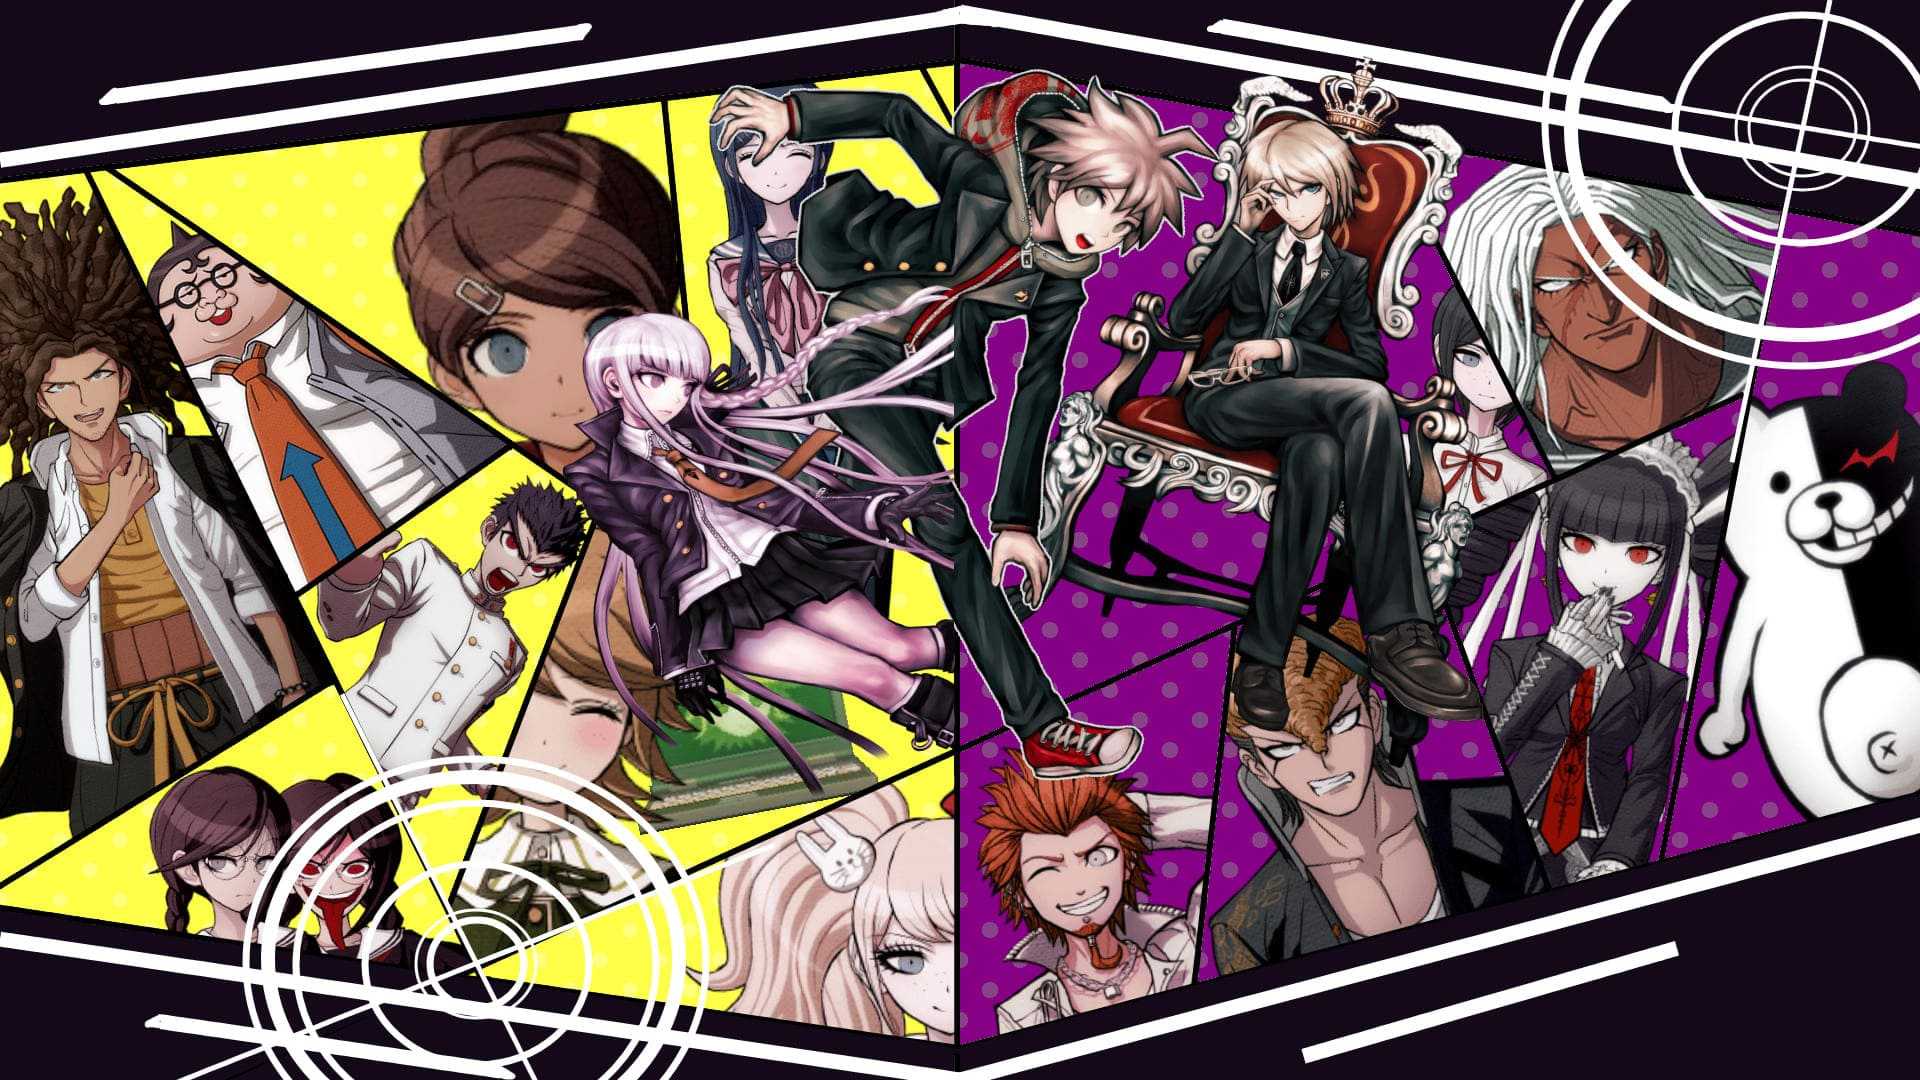 Download Danganronpa Wallpaper for free, use for mobile and desktop. 